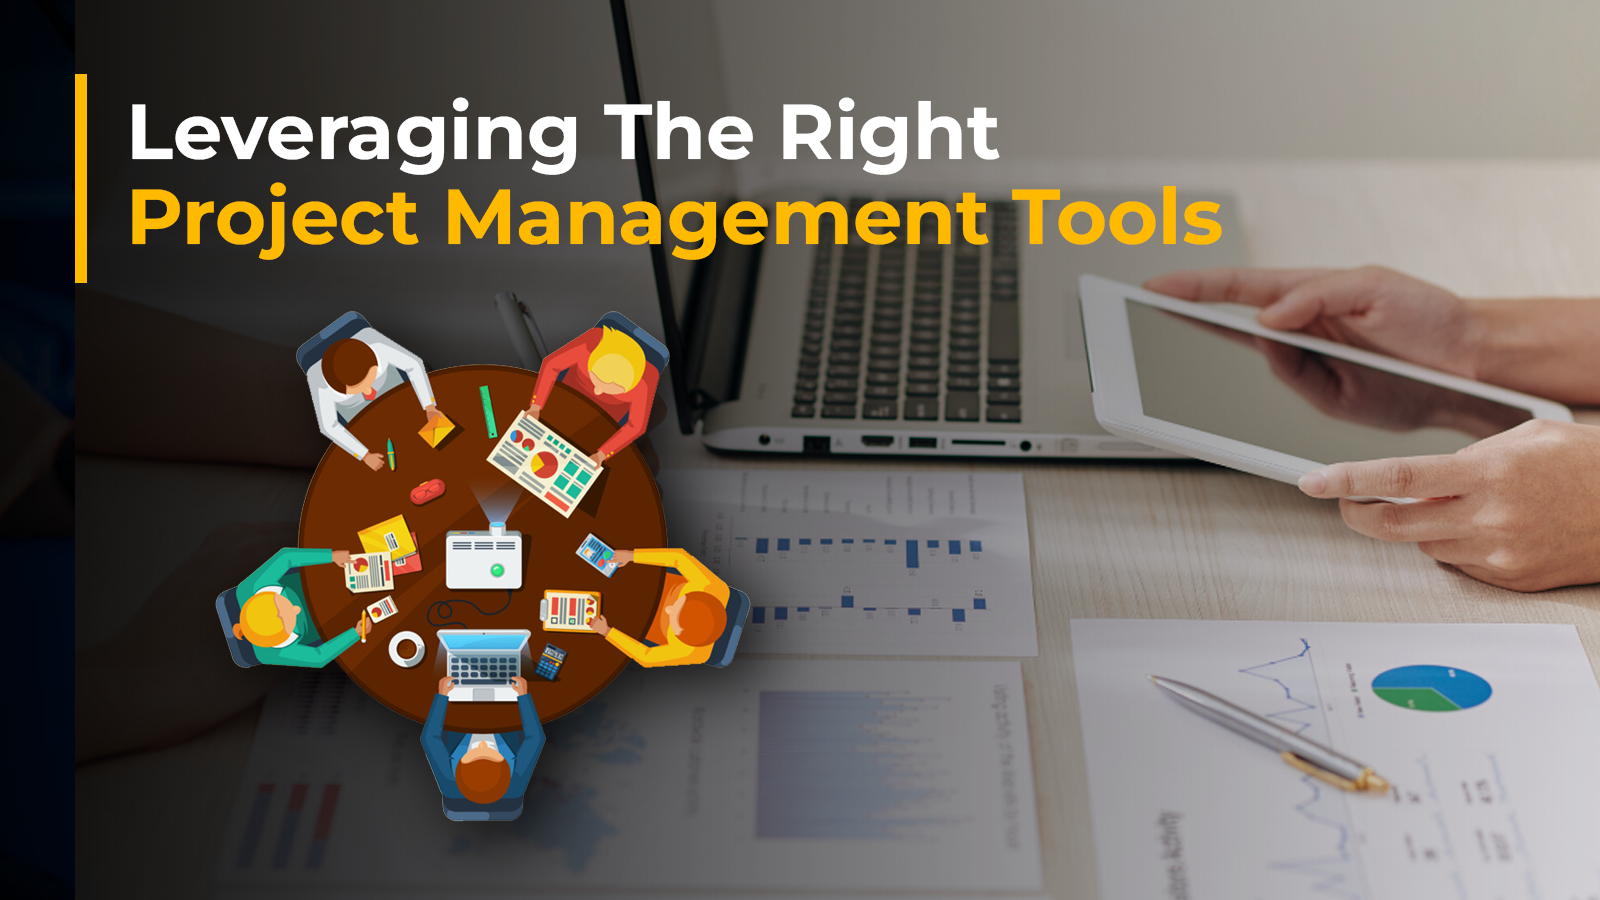 Stay Ahead of the Game: The Top Project Management Tools for Streamlining IT Projects in 2023